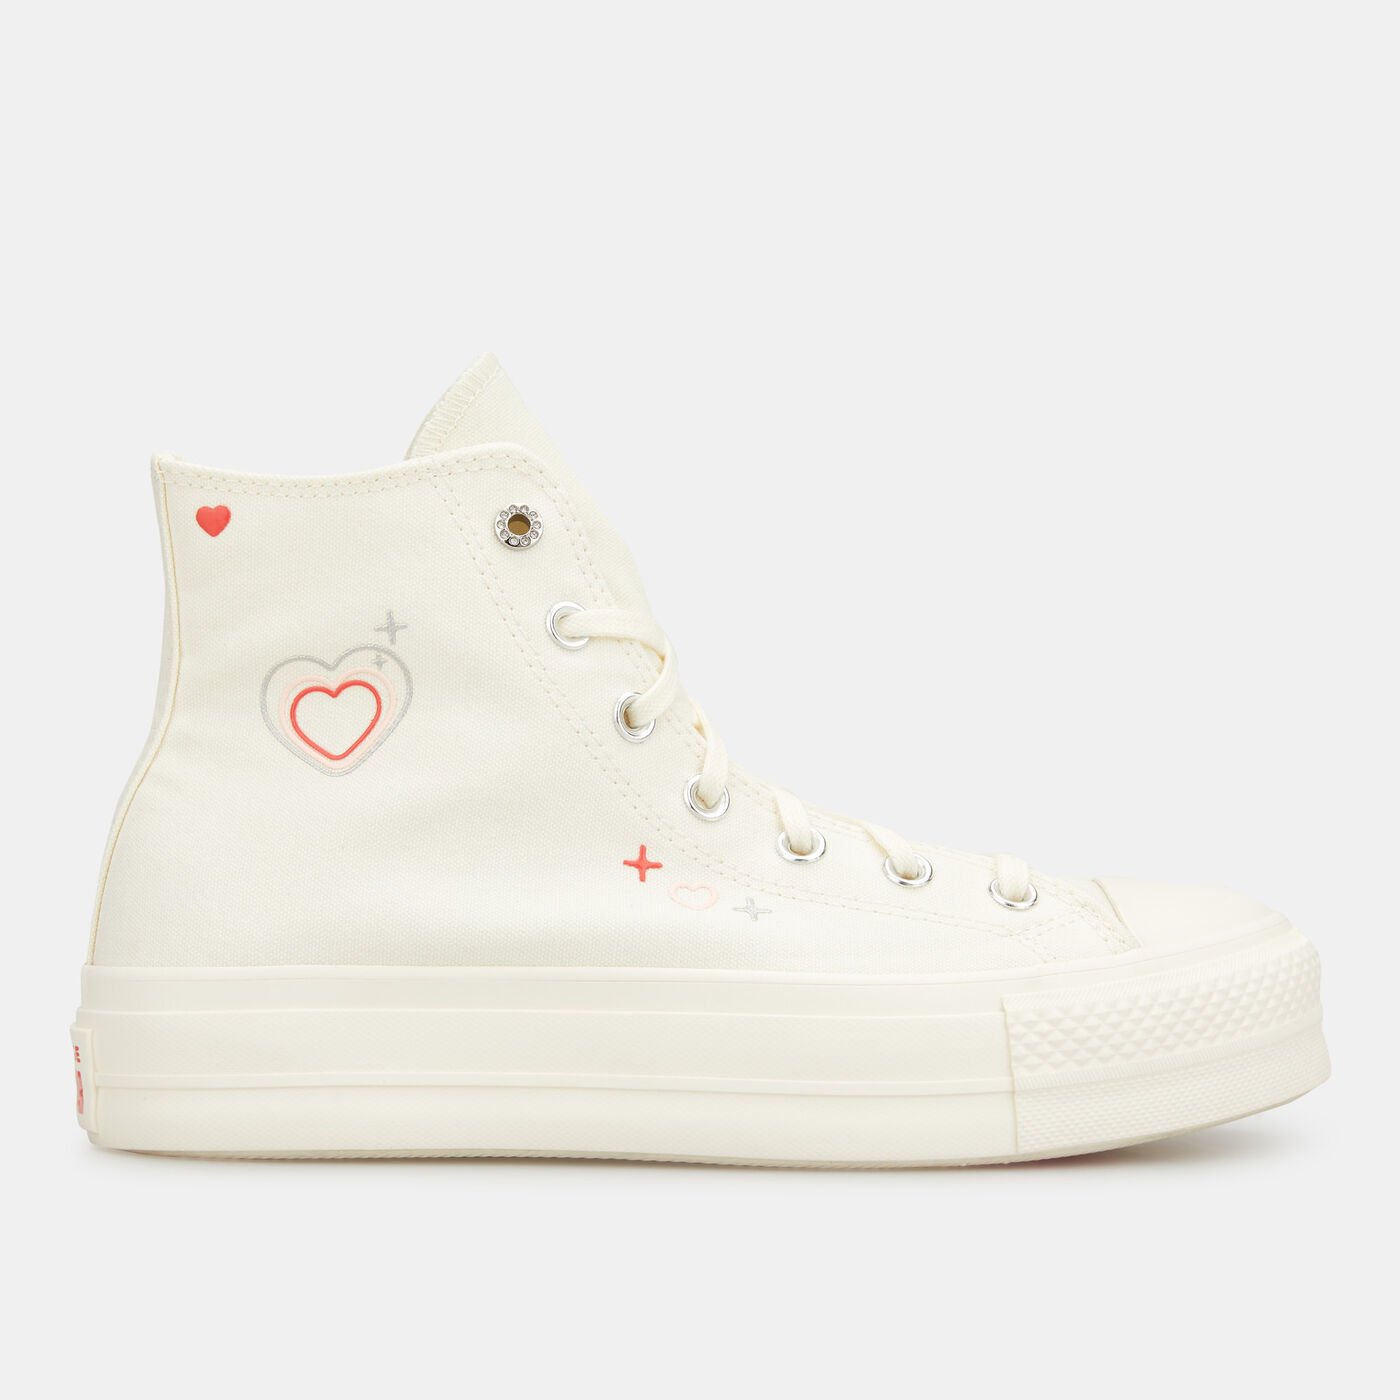 Women's Chuck Taylor All Star Shoes